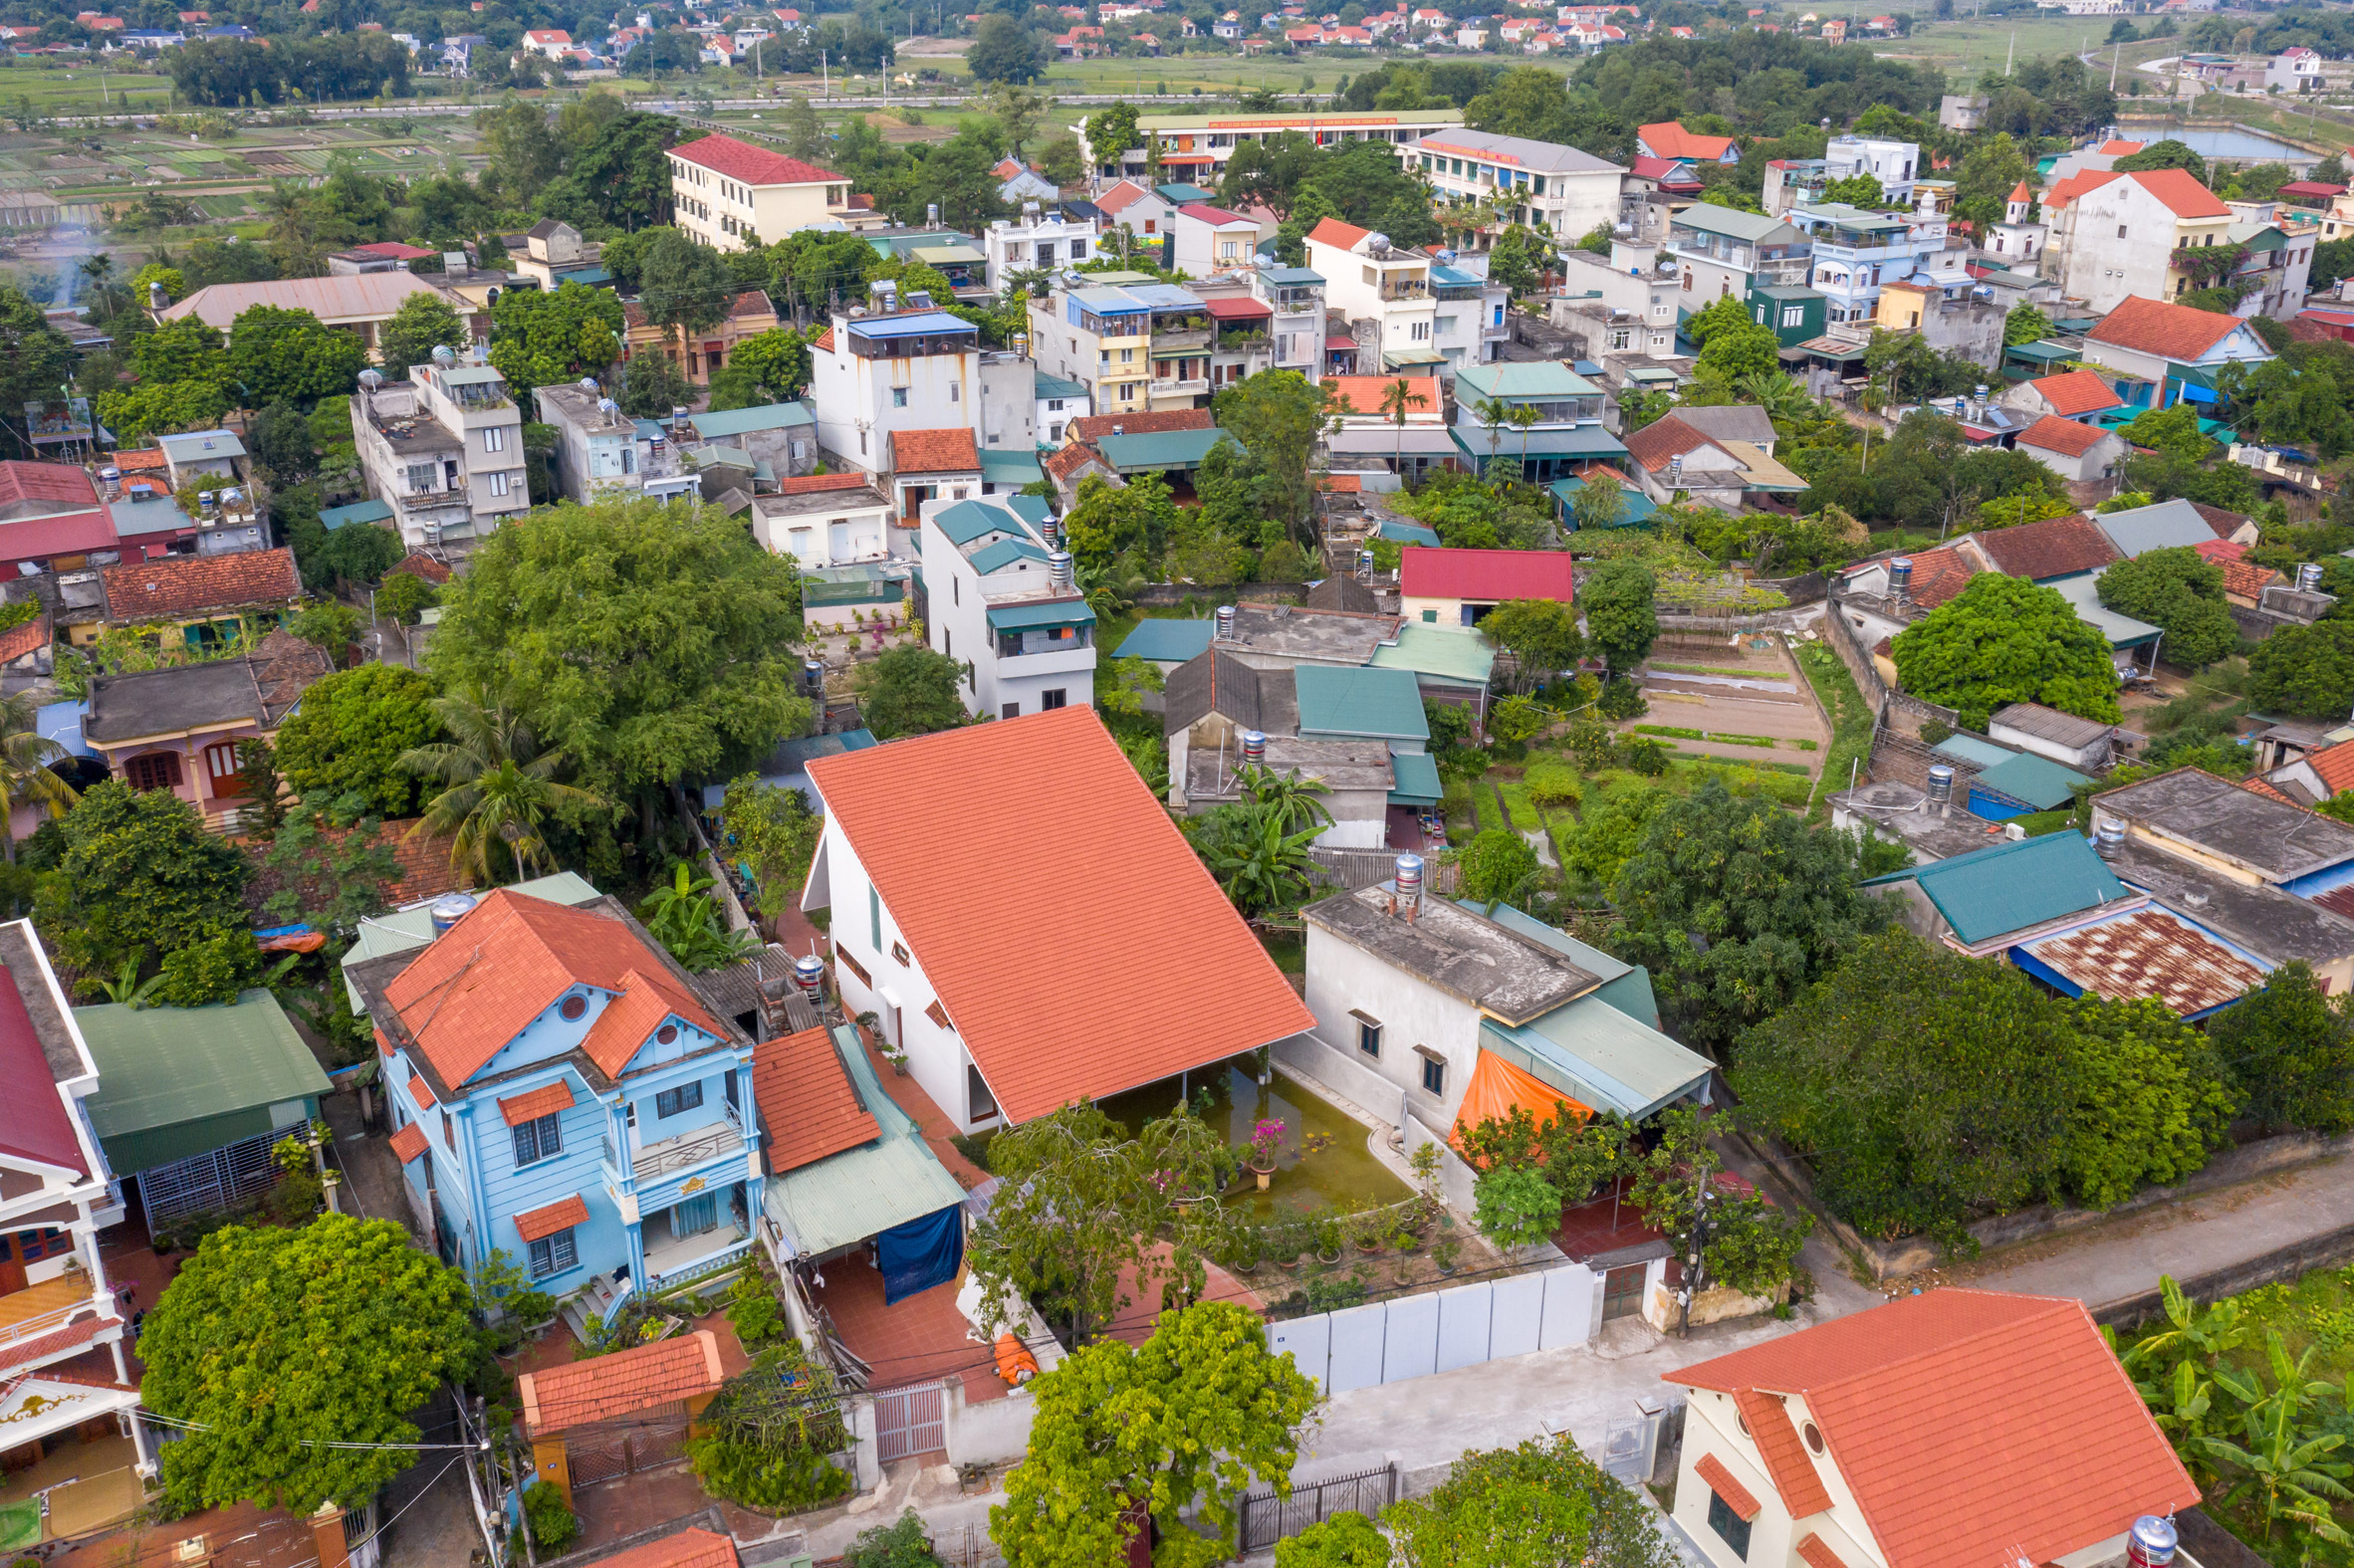 Aerial view of homes in Vietnam with lush green gardens and terracotta-tiled roofs